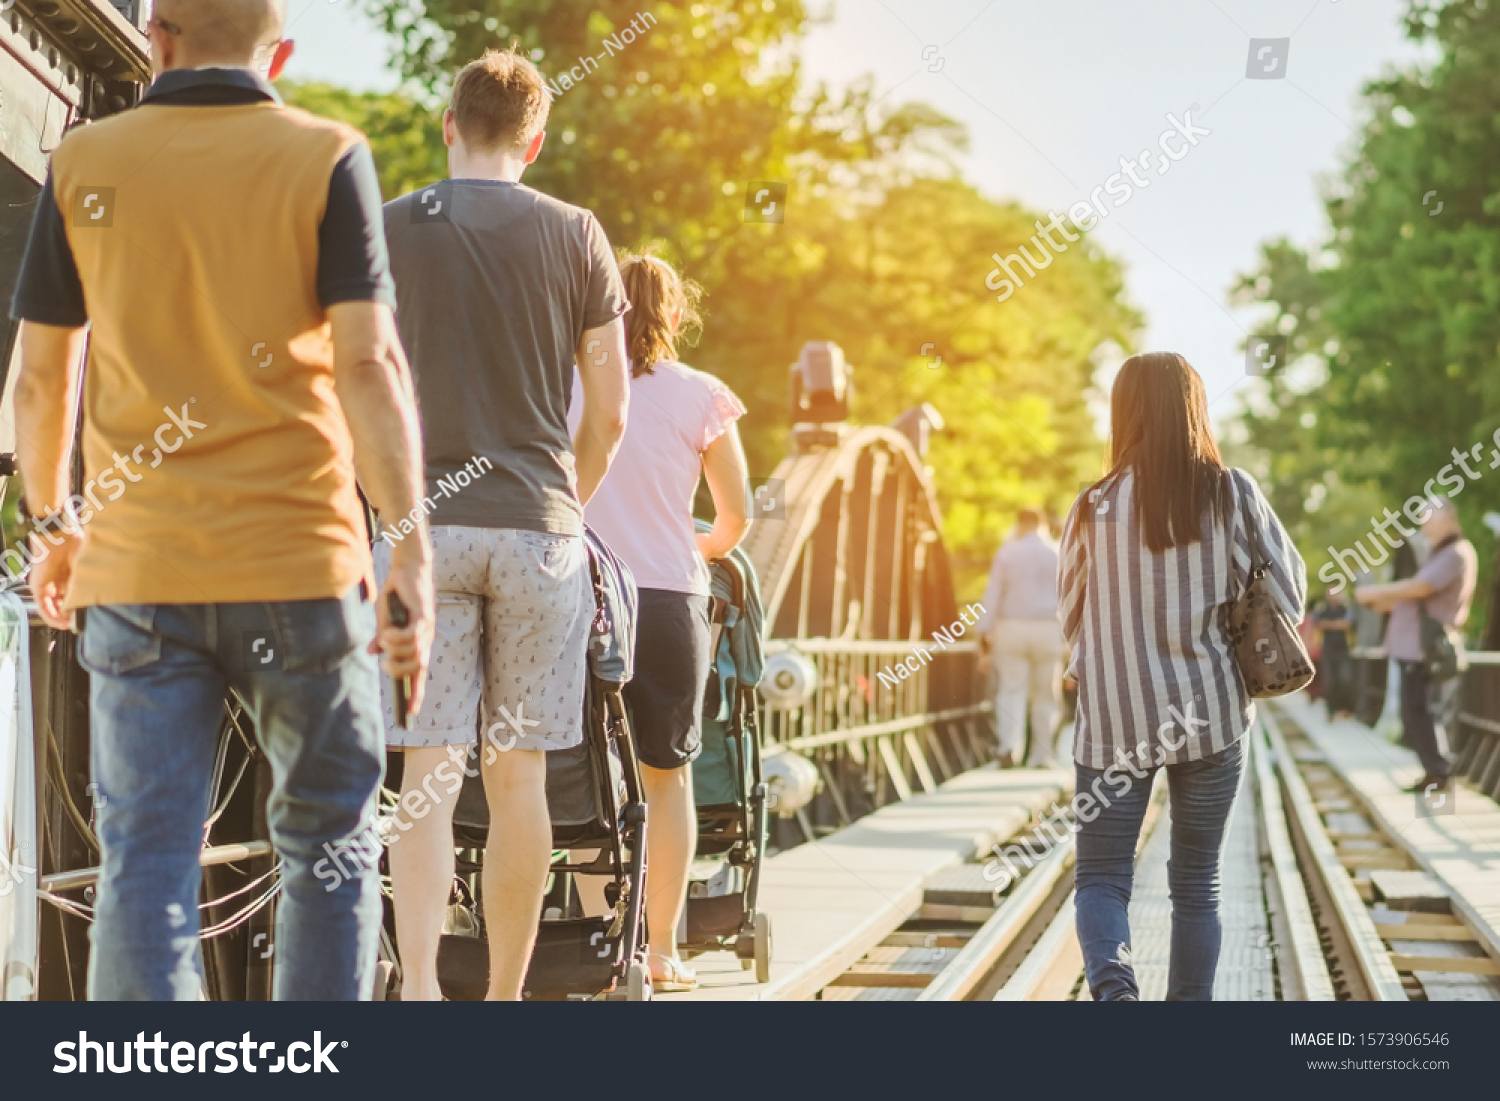 Dad and mum take their children on a stroller to walk and enjoy the beauty of The Bridge Over the River Kwai happily in the evening in Kanchanaburi, Thailand #1573906546